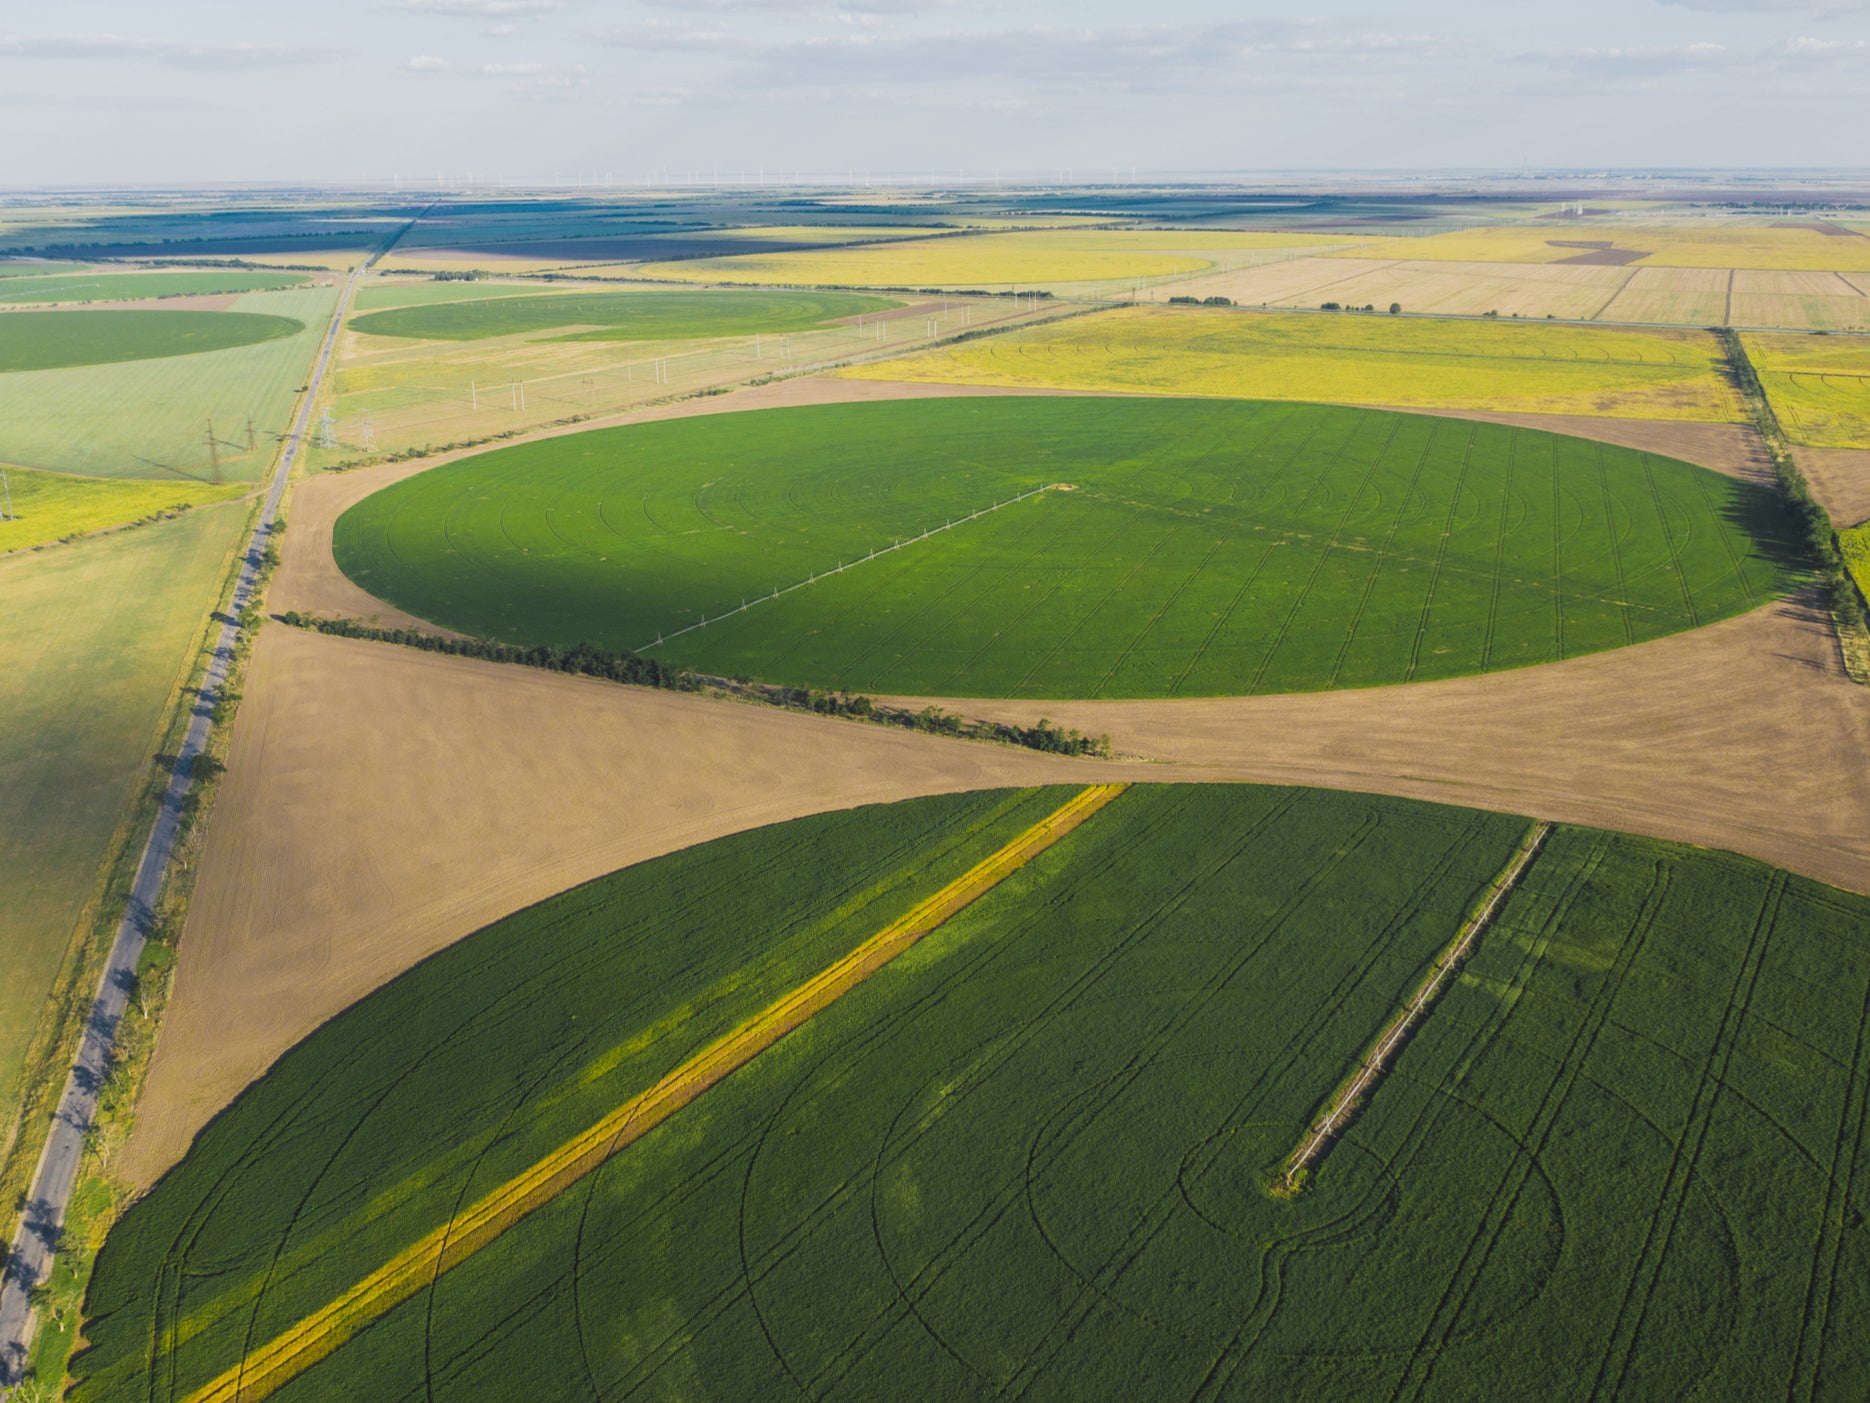 Circular fields on farms in Ukraine. ‘Patchworks of nature’ alongside high-yield farming areas will help biodiversity flourish, researchers say